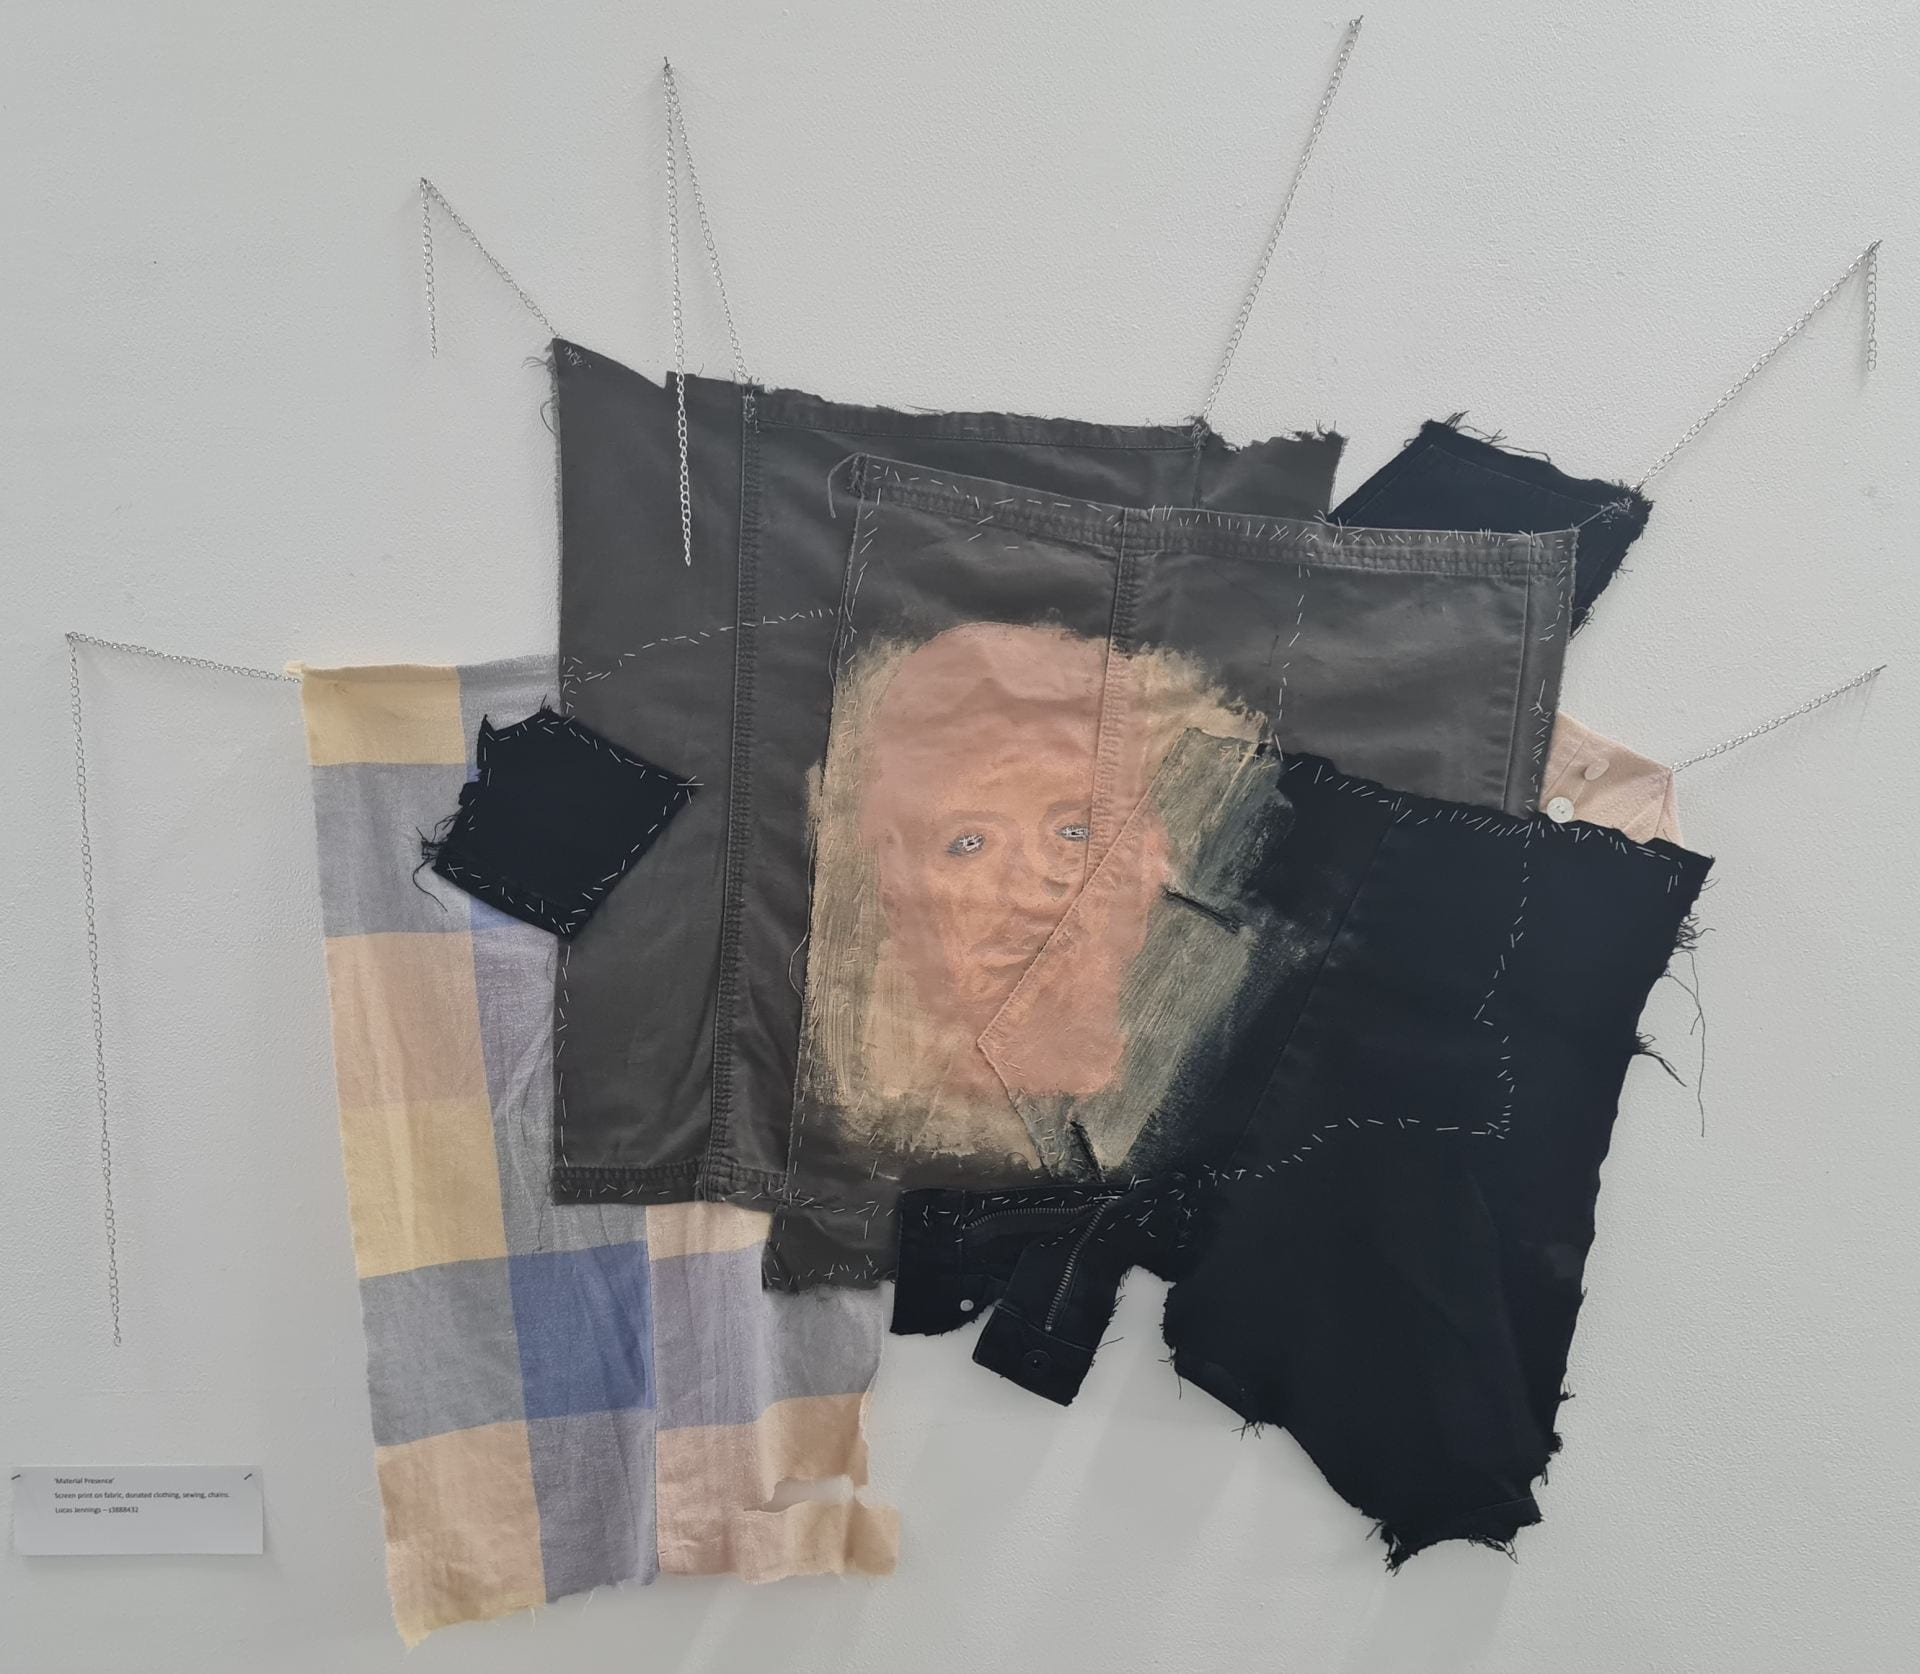 Sections of pants and shirts a stitched together unevenly to create a canvas. On the clothing a face has been painted.